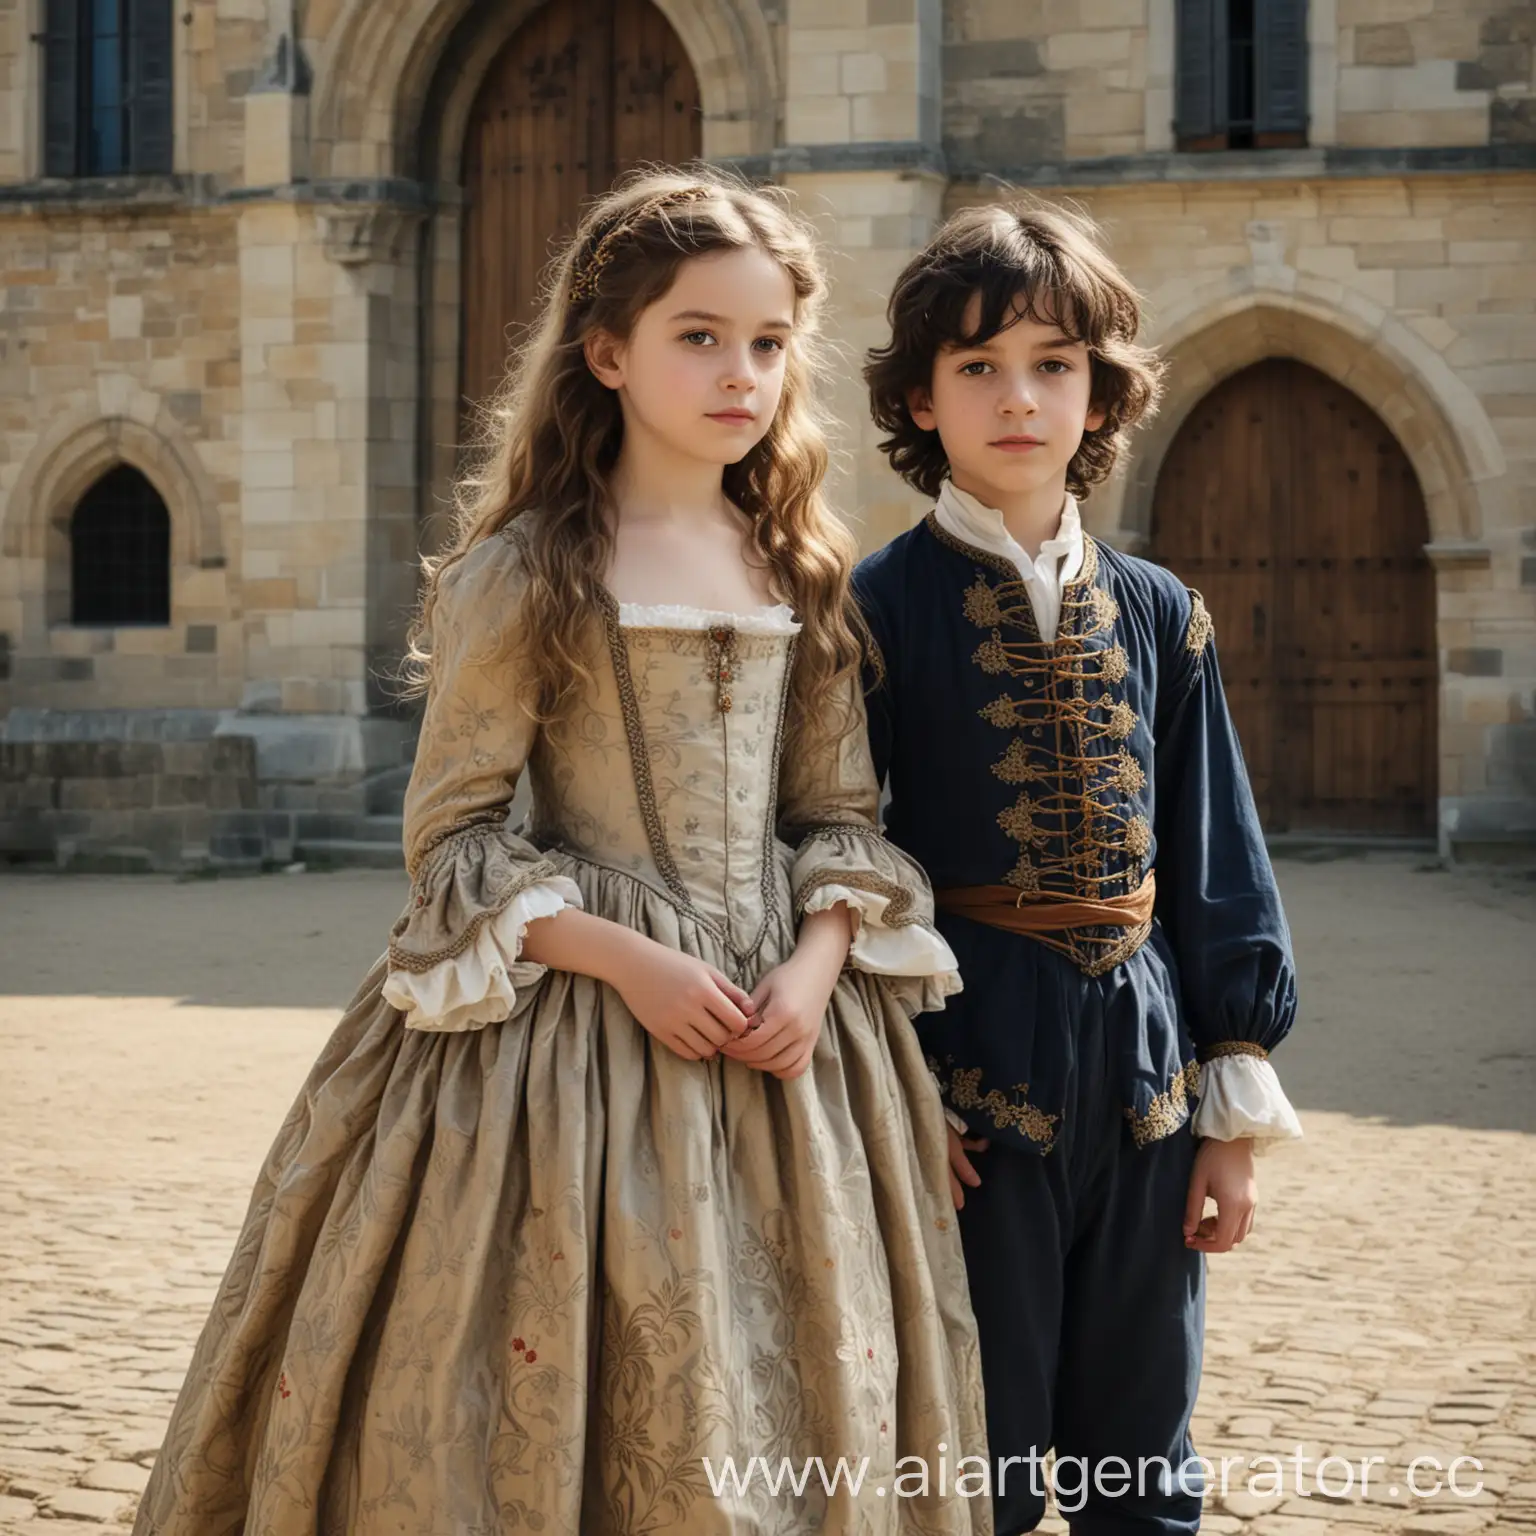 Young-Girl-and-Boy-in-16th-Century-French-Attire-by-a-Majestic-Castle